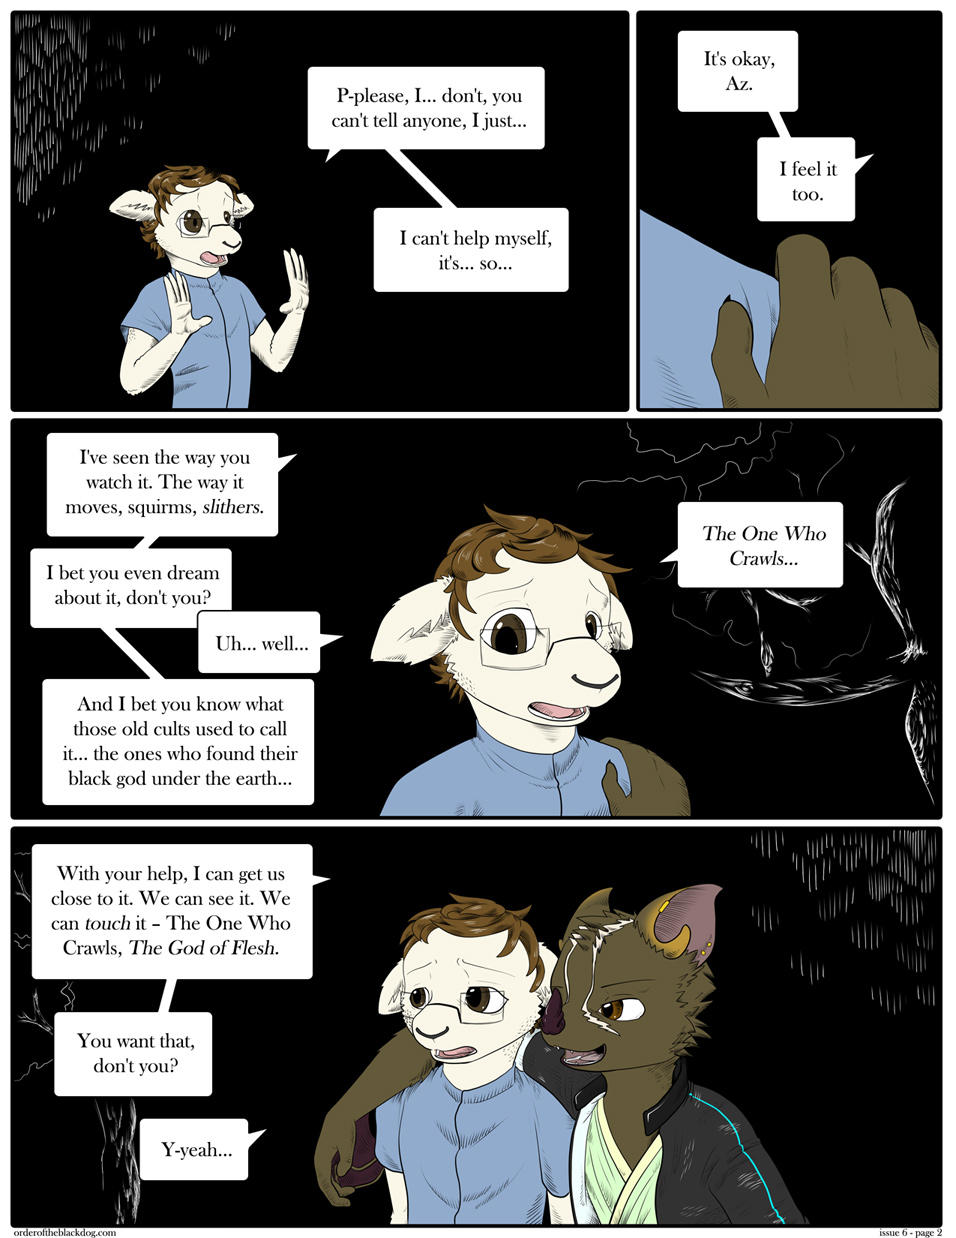 Issue 6, Page 2